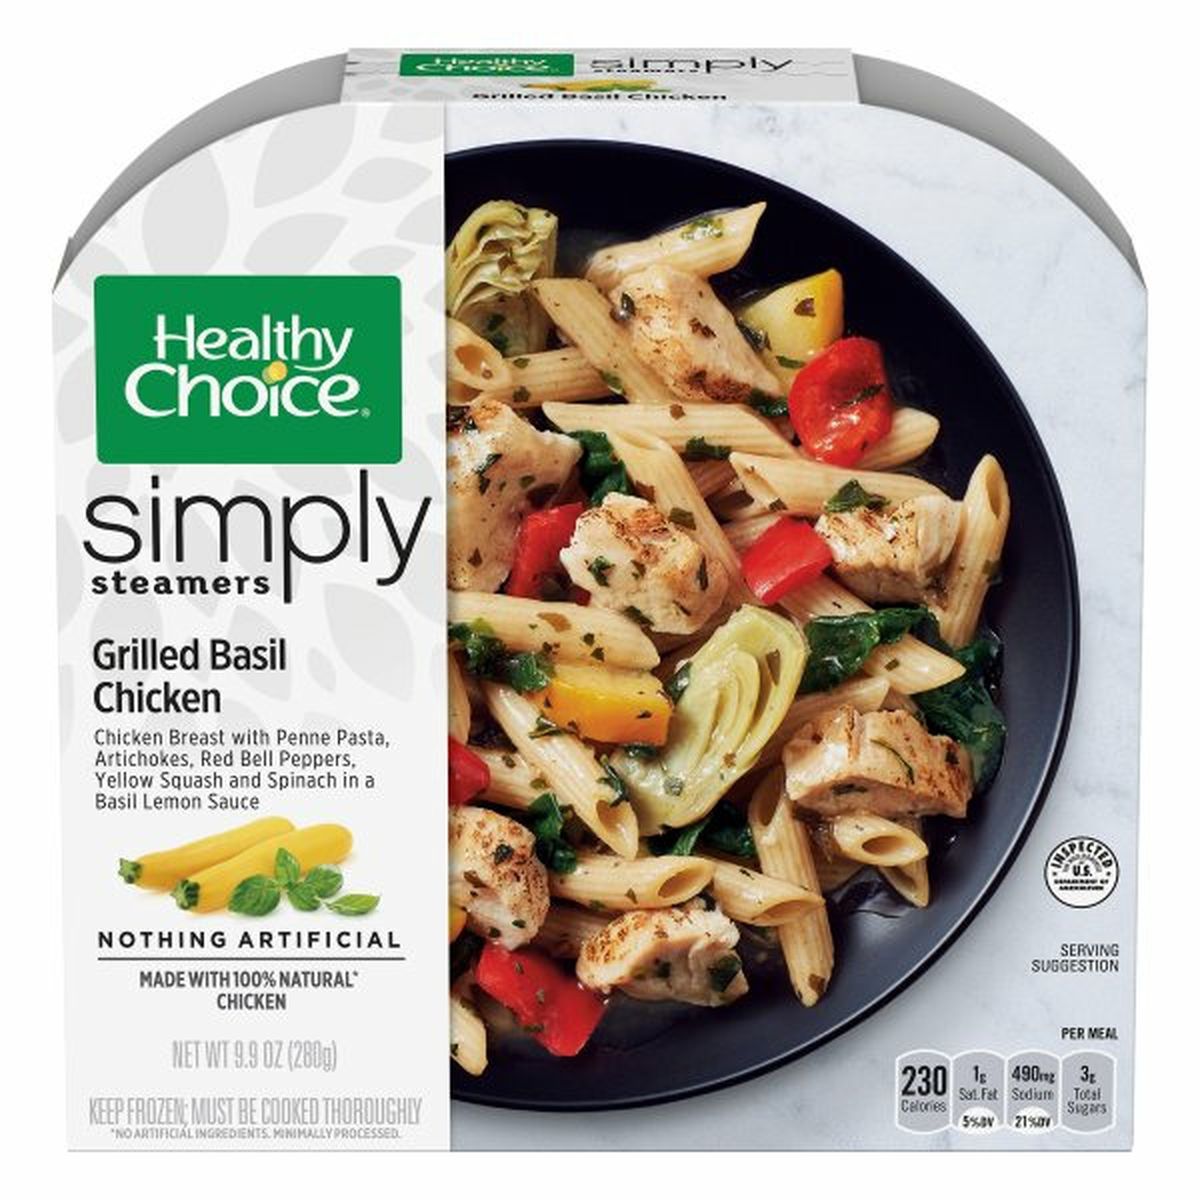 Calories in Healthy Choice Simply Steamers Grilled Basil Chicken